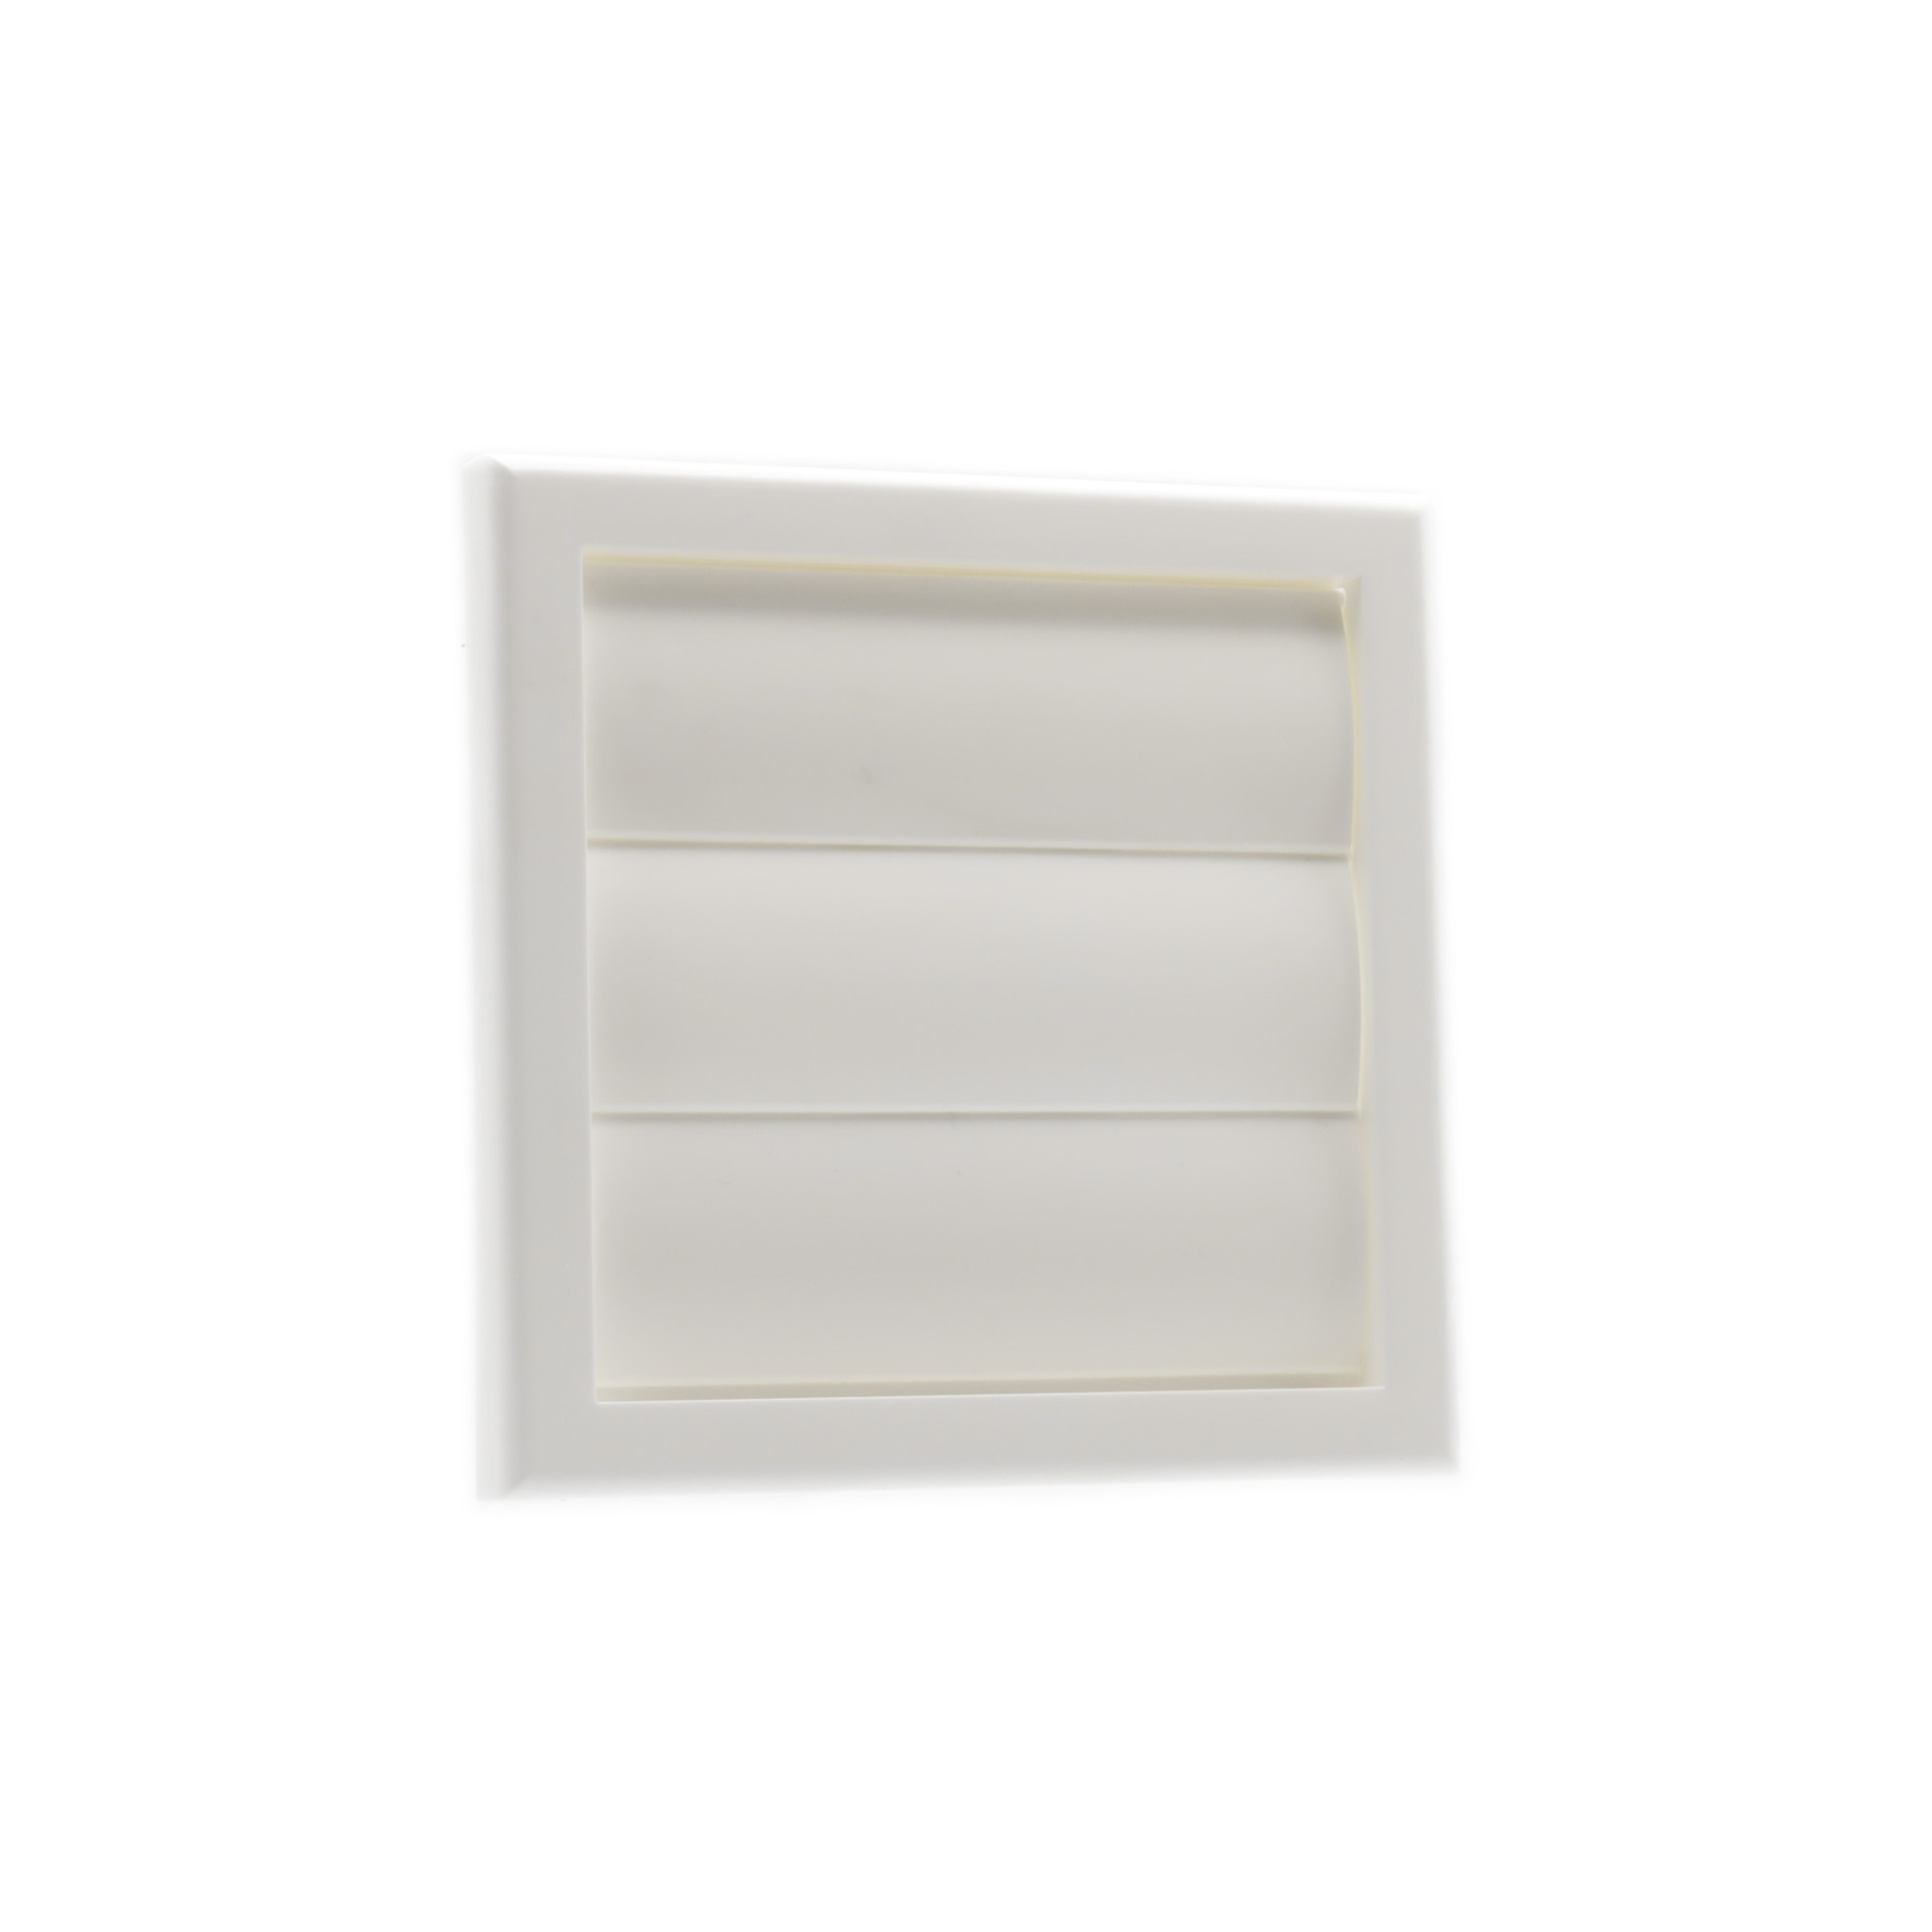 62503600 Wall Outlet 110x54mm (3 flaps) White